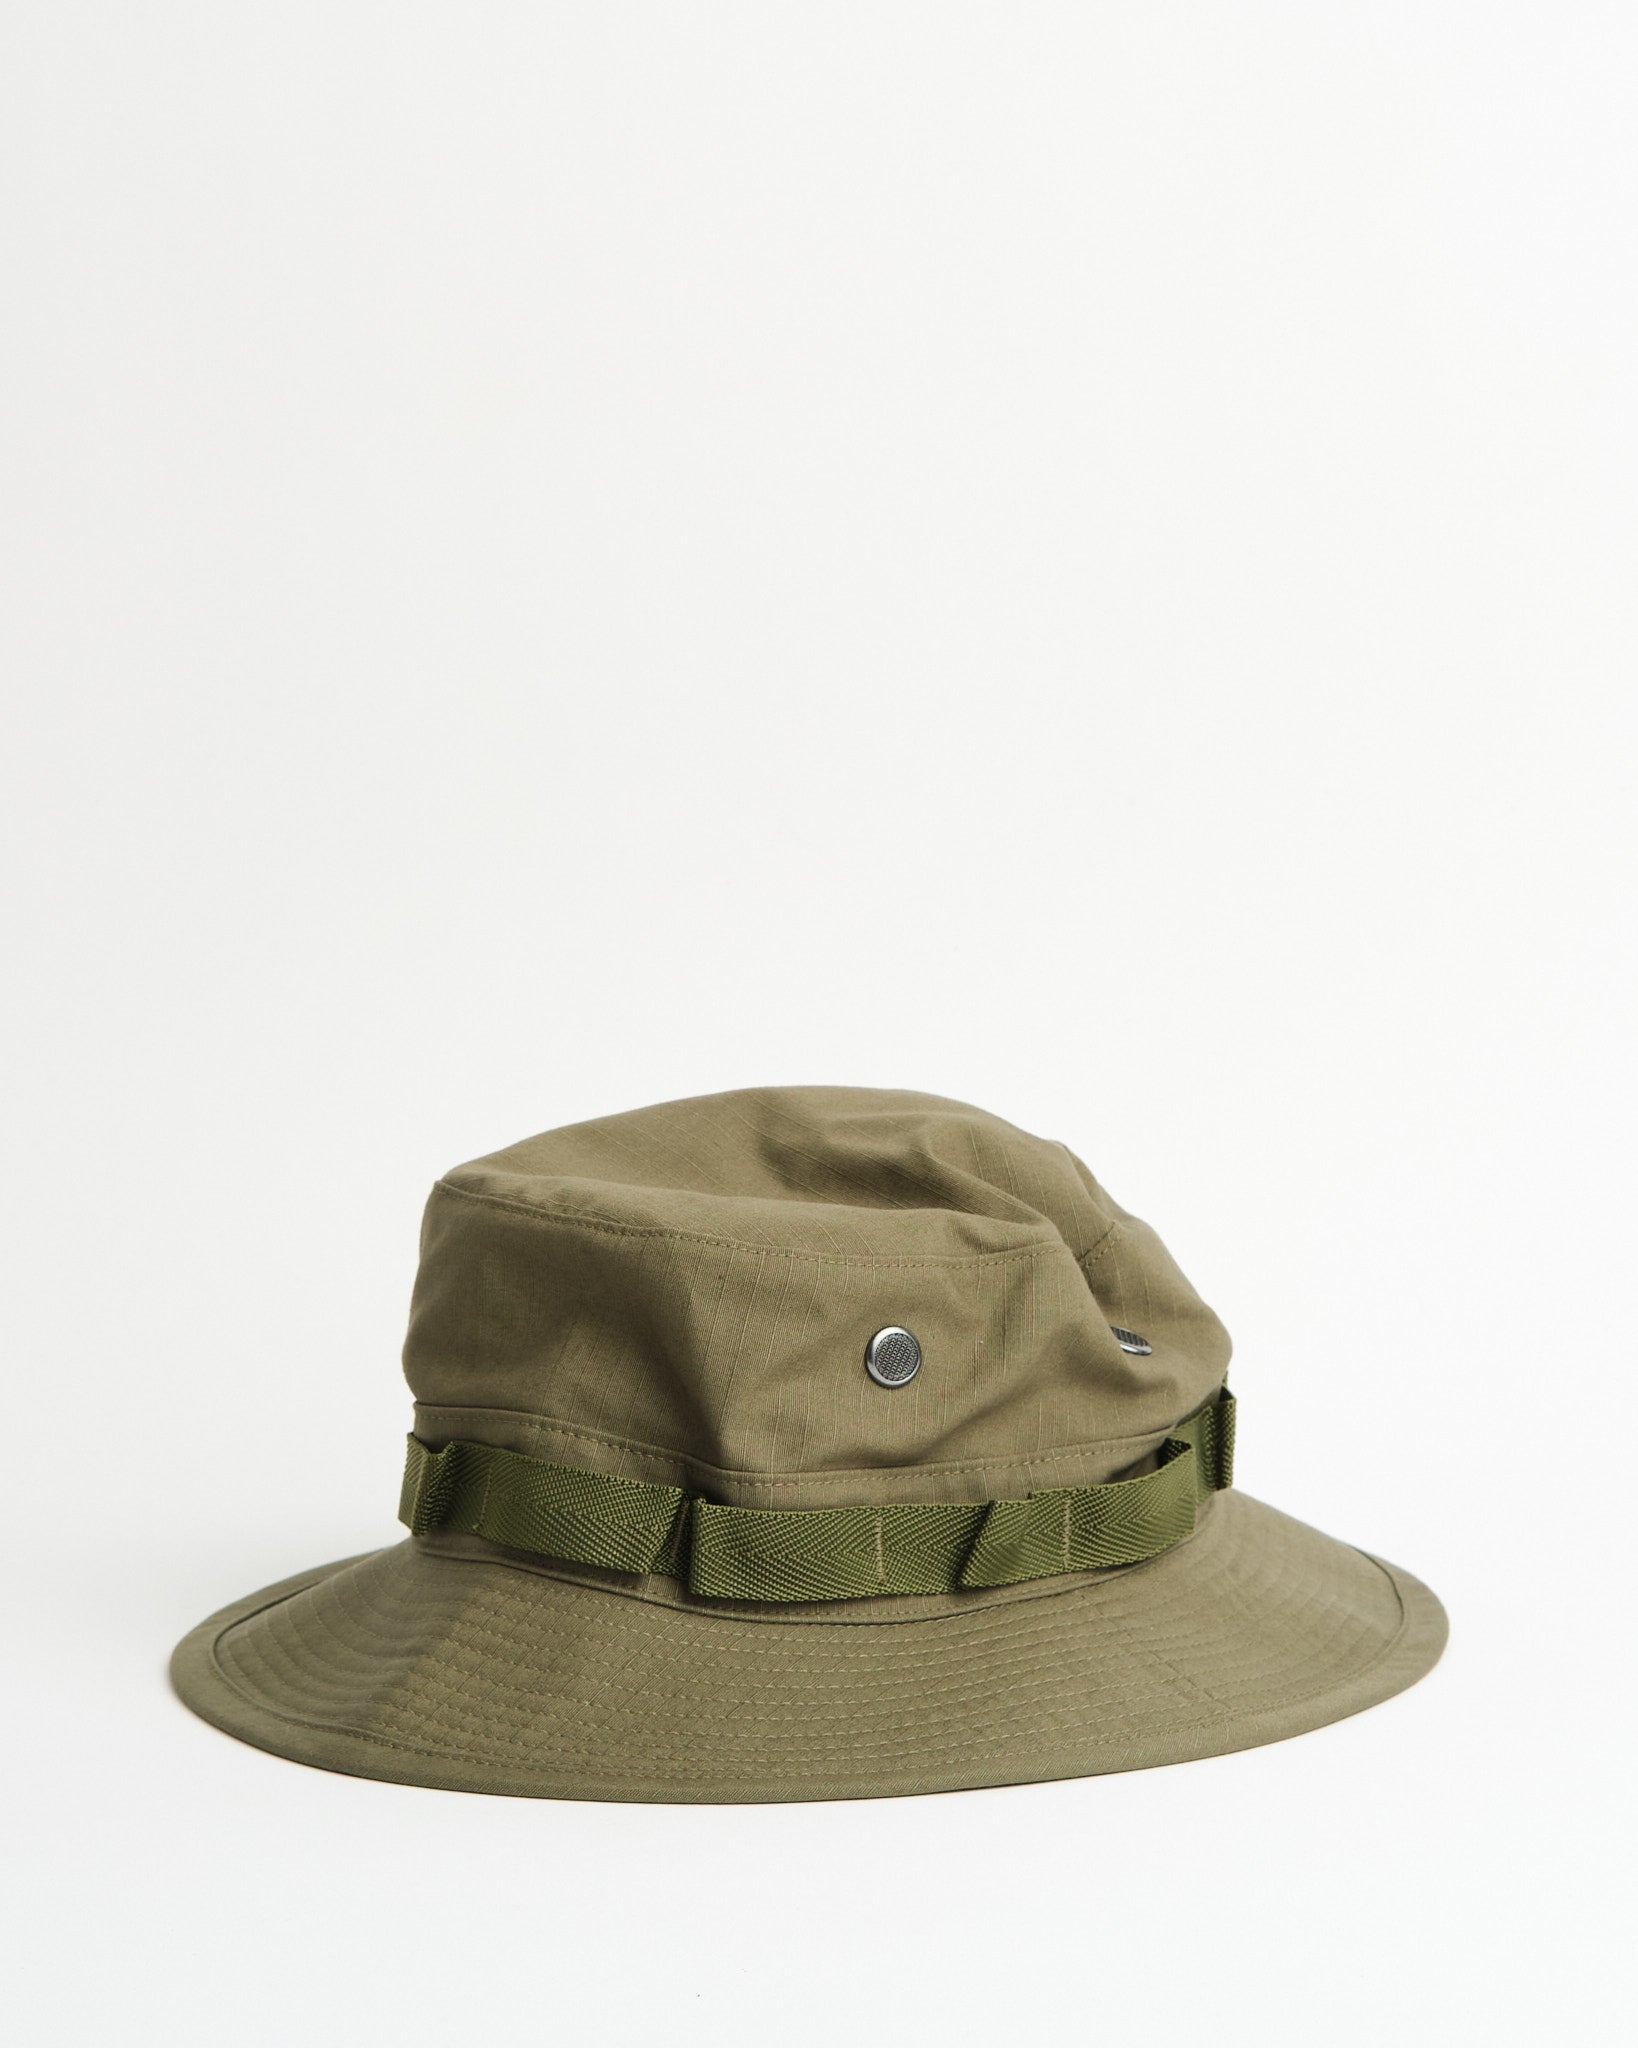 US ARMY JUNGLE HAT RIPSTOP ARMY GREEN - Meadow